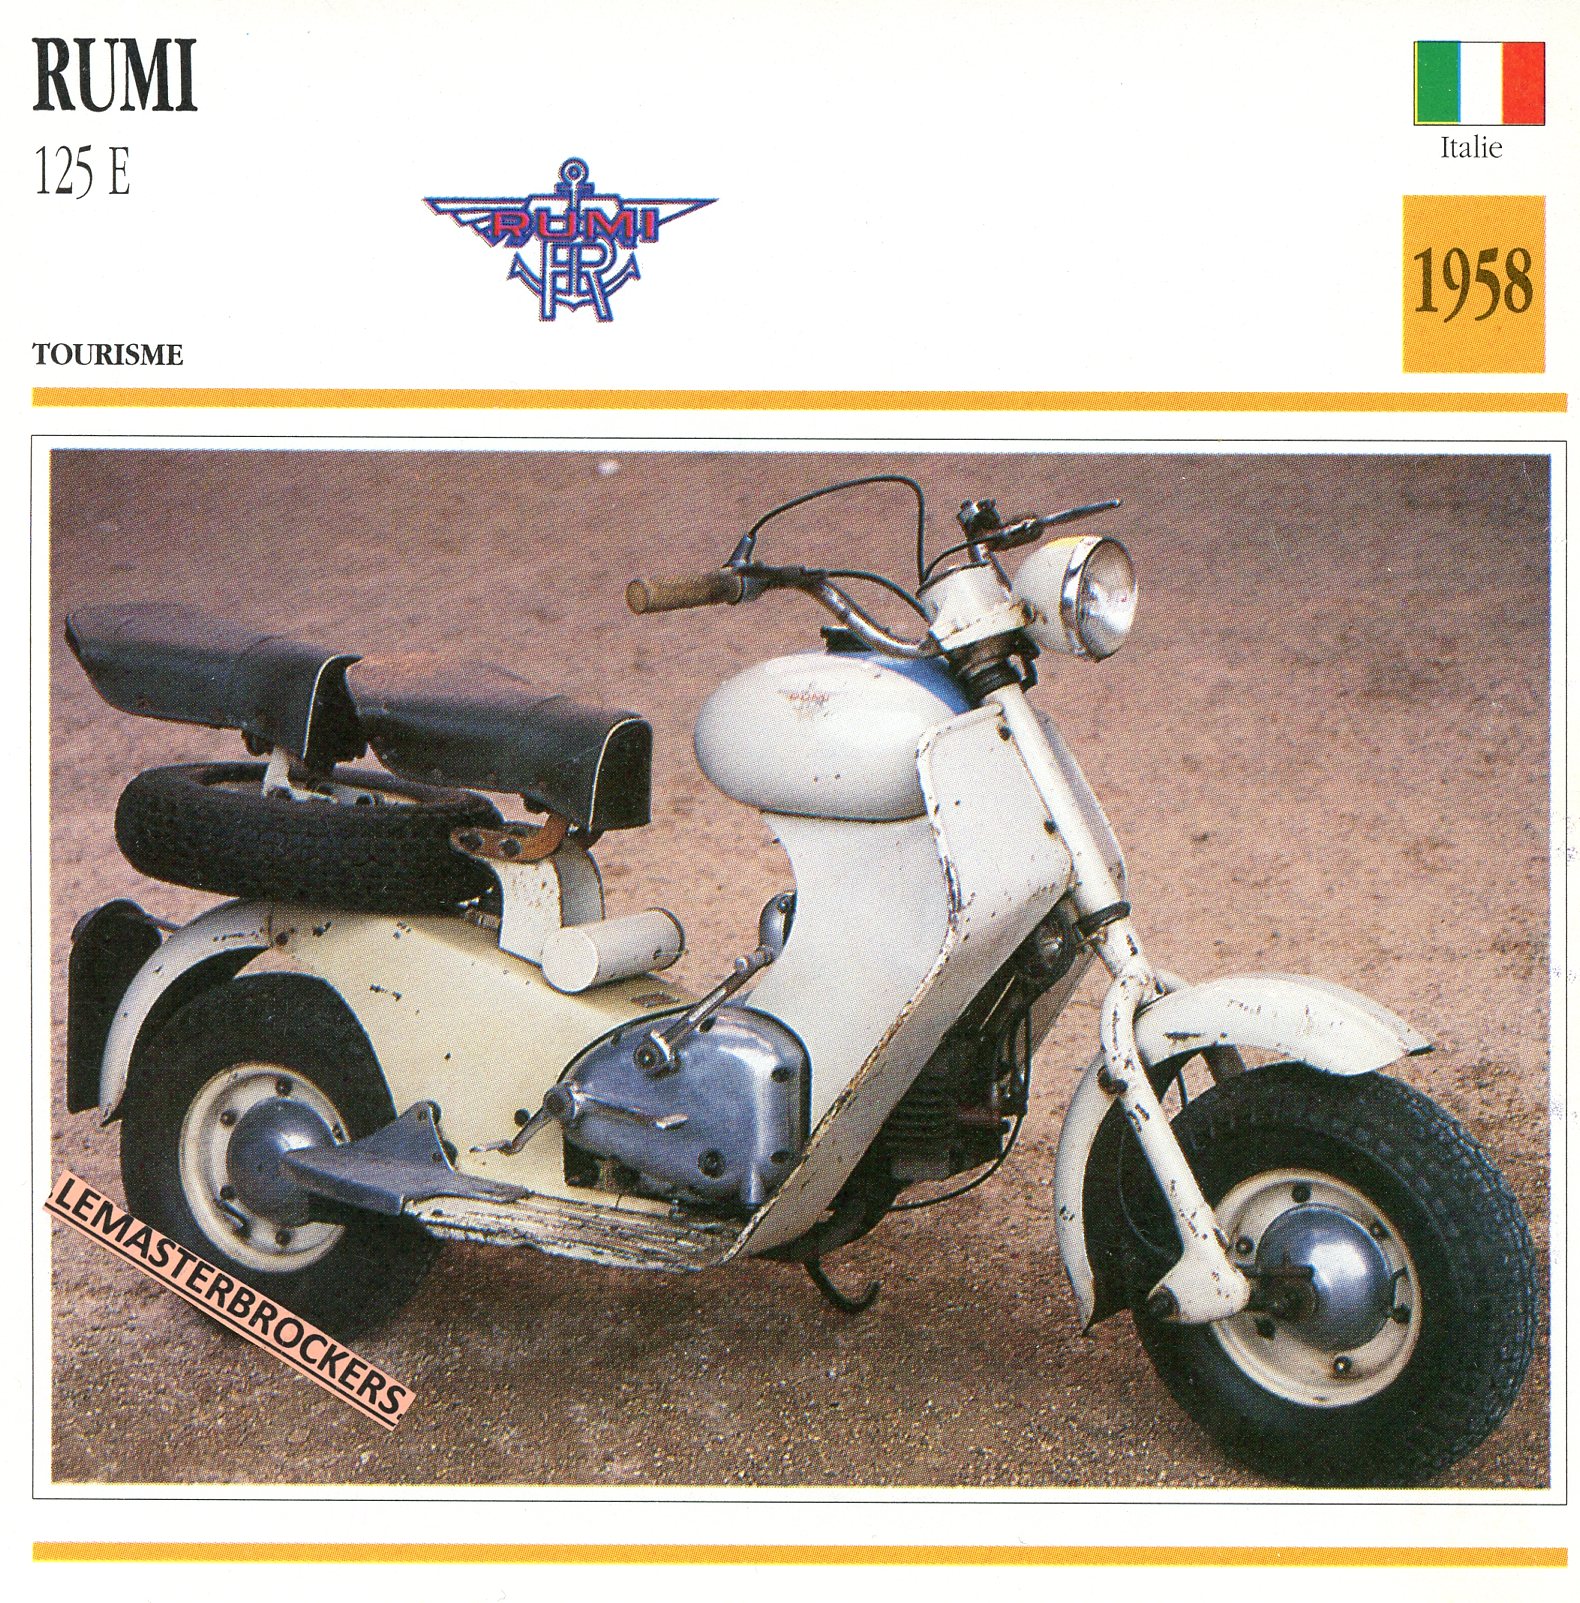 RUMI-125E-1958-FICHE-SCOOTER-LEMASTERBROCKERS-CARD-MOTORCYCLE